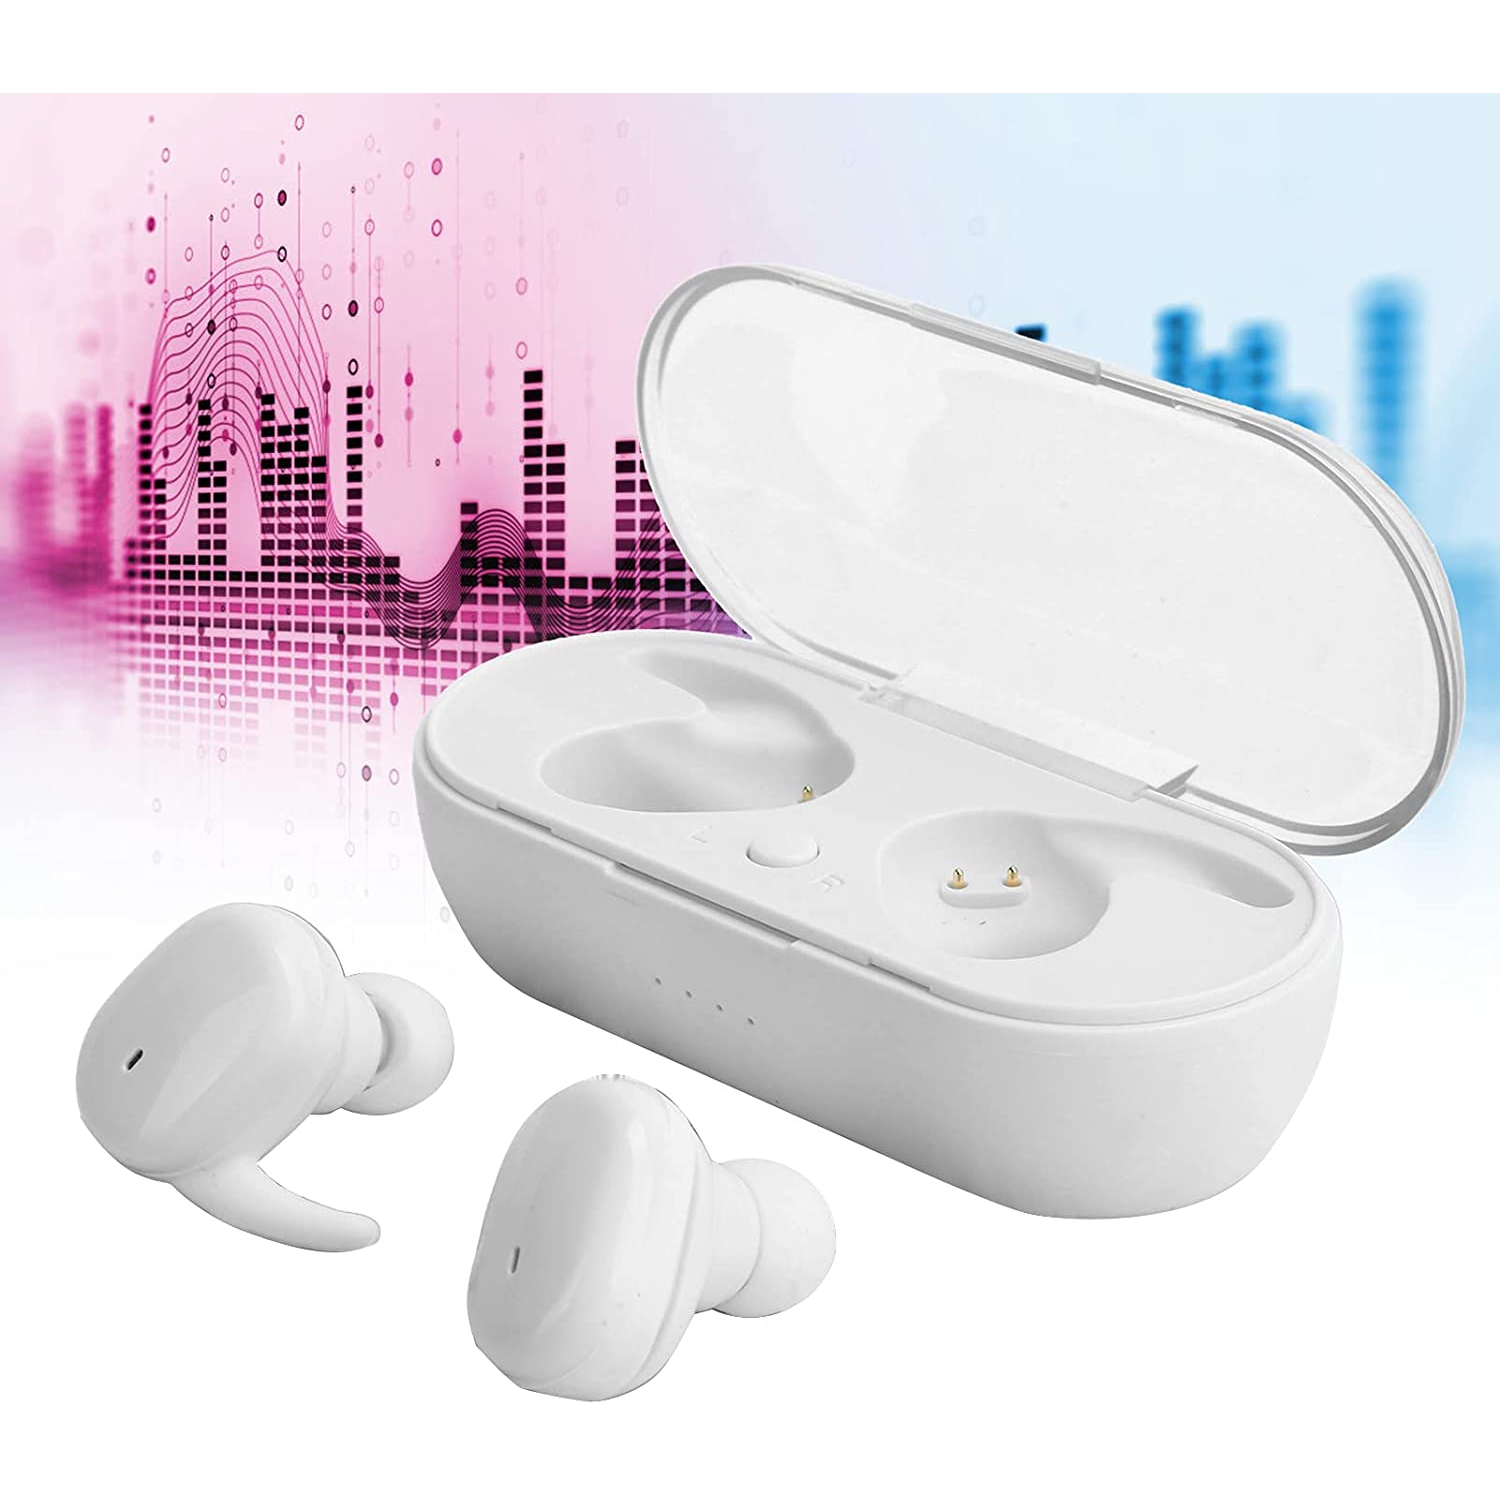 Wireless Earbuds Bluetooth Headphones Touch Control Stereo HiFi Sports Headset Built-in Mic Portable Charger case for iPhone Samsung Huawei iOS Android Cellphones (White)